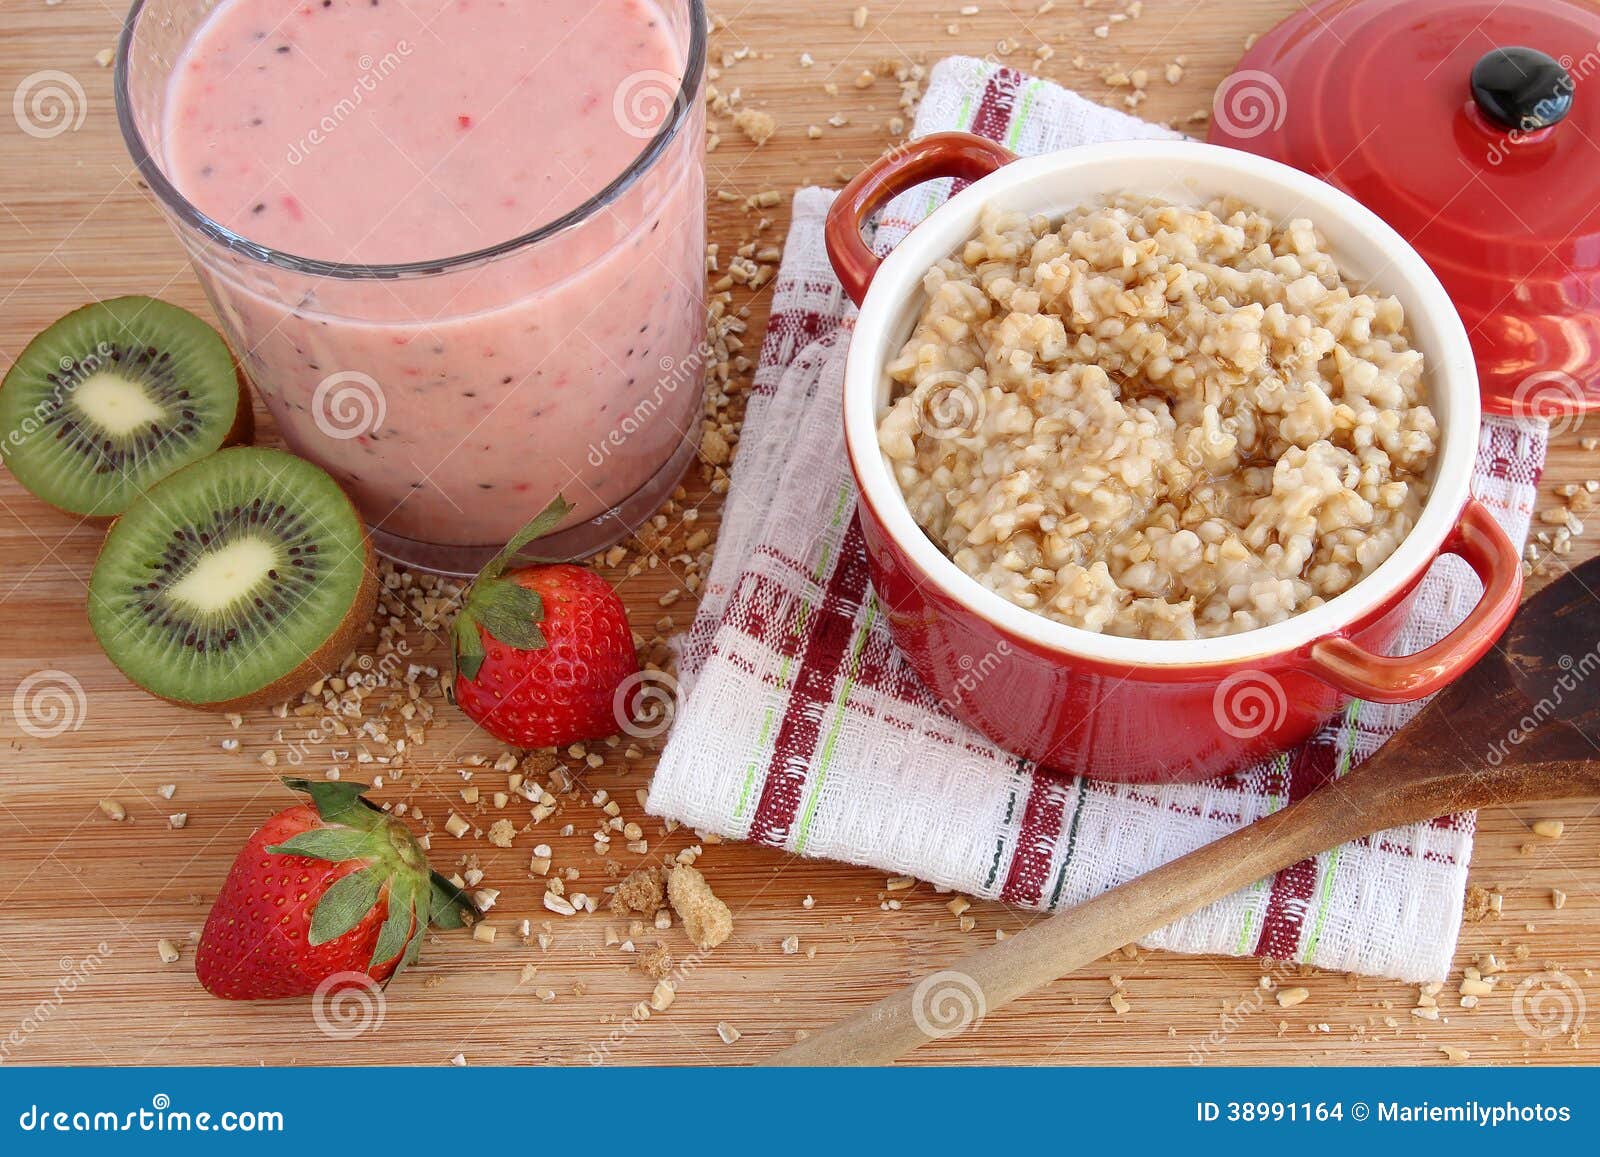 oatmeal and smoothie